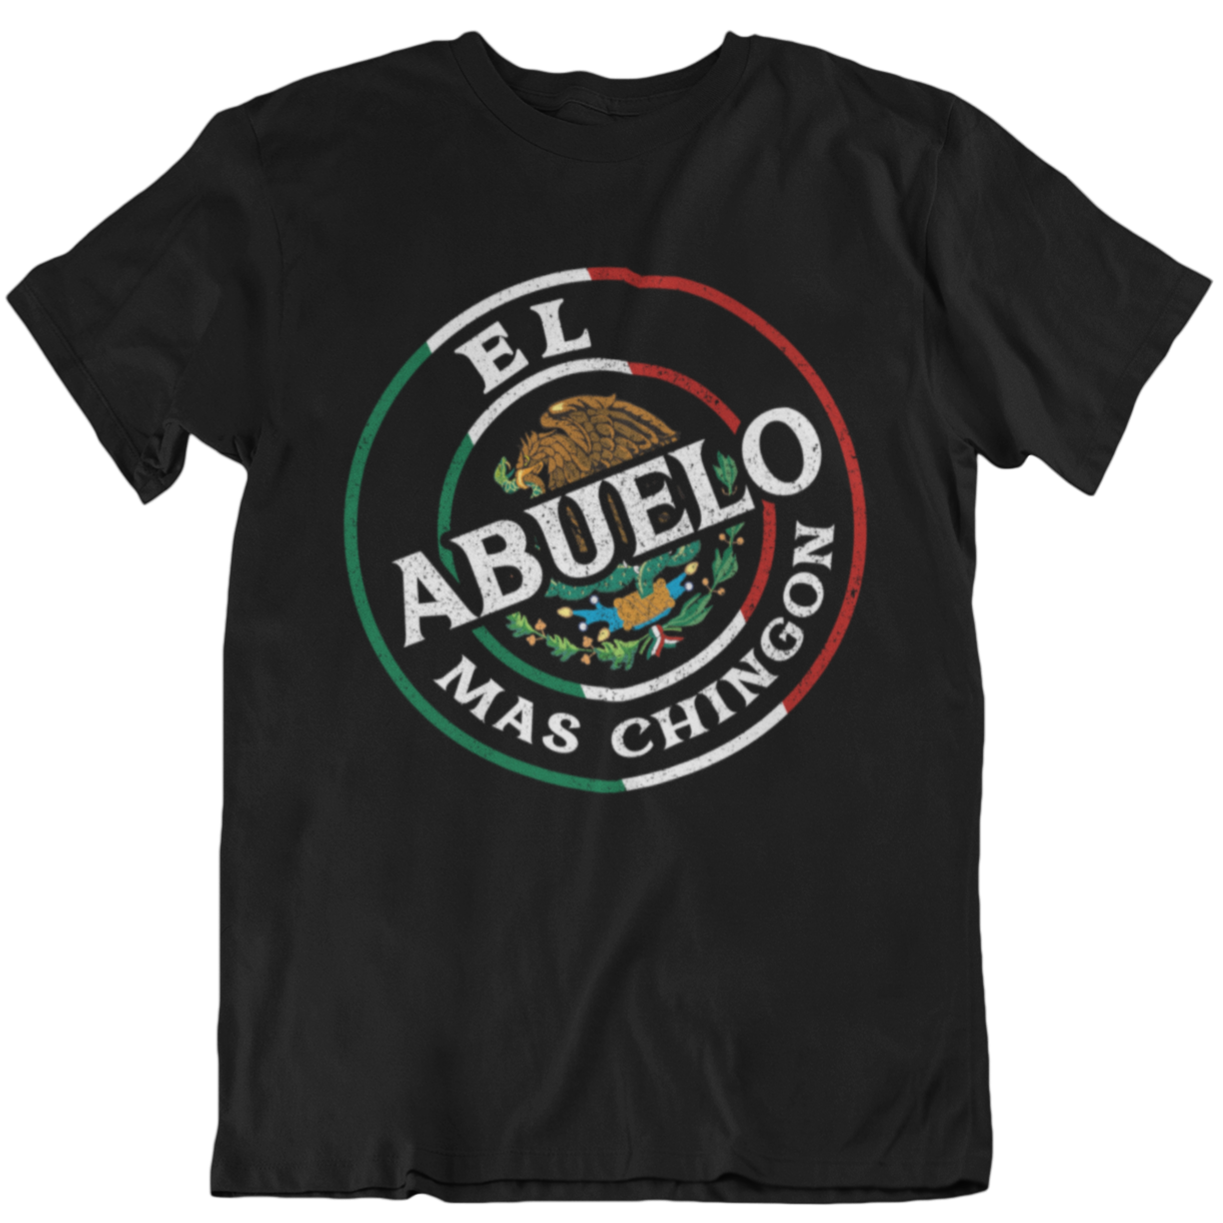 Stylish 'El Abuelo Mas Chingon' T-Shirt for grandfathers featuring a circular emblem with the Mexican colors and Mexican coat of arms